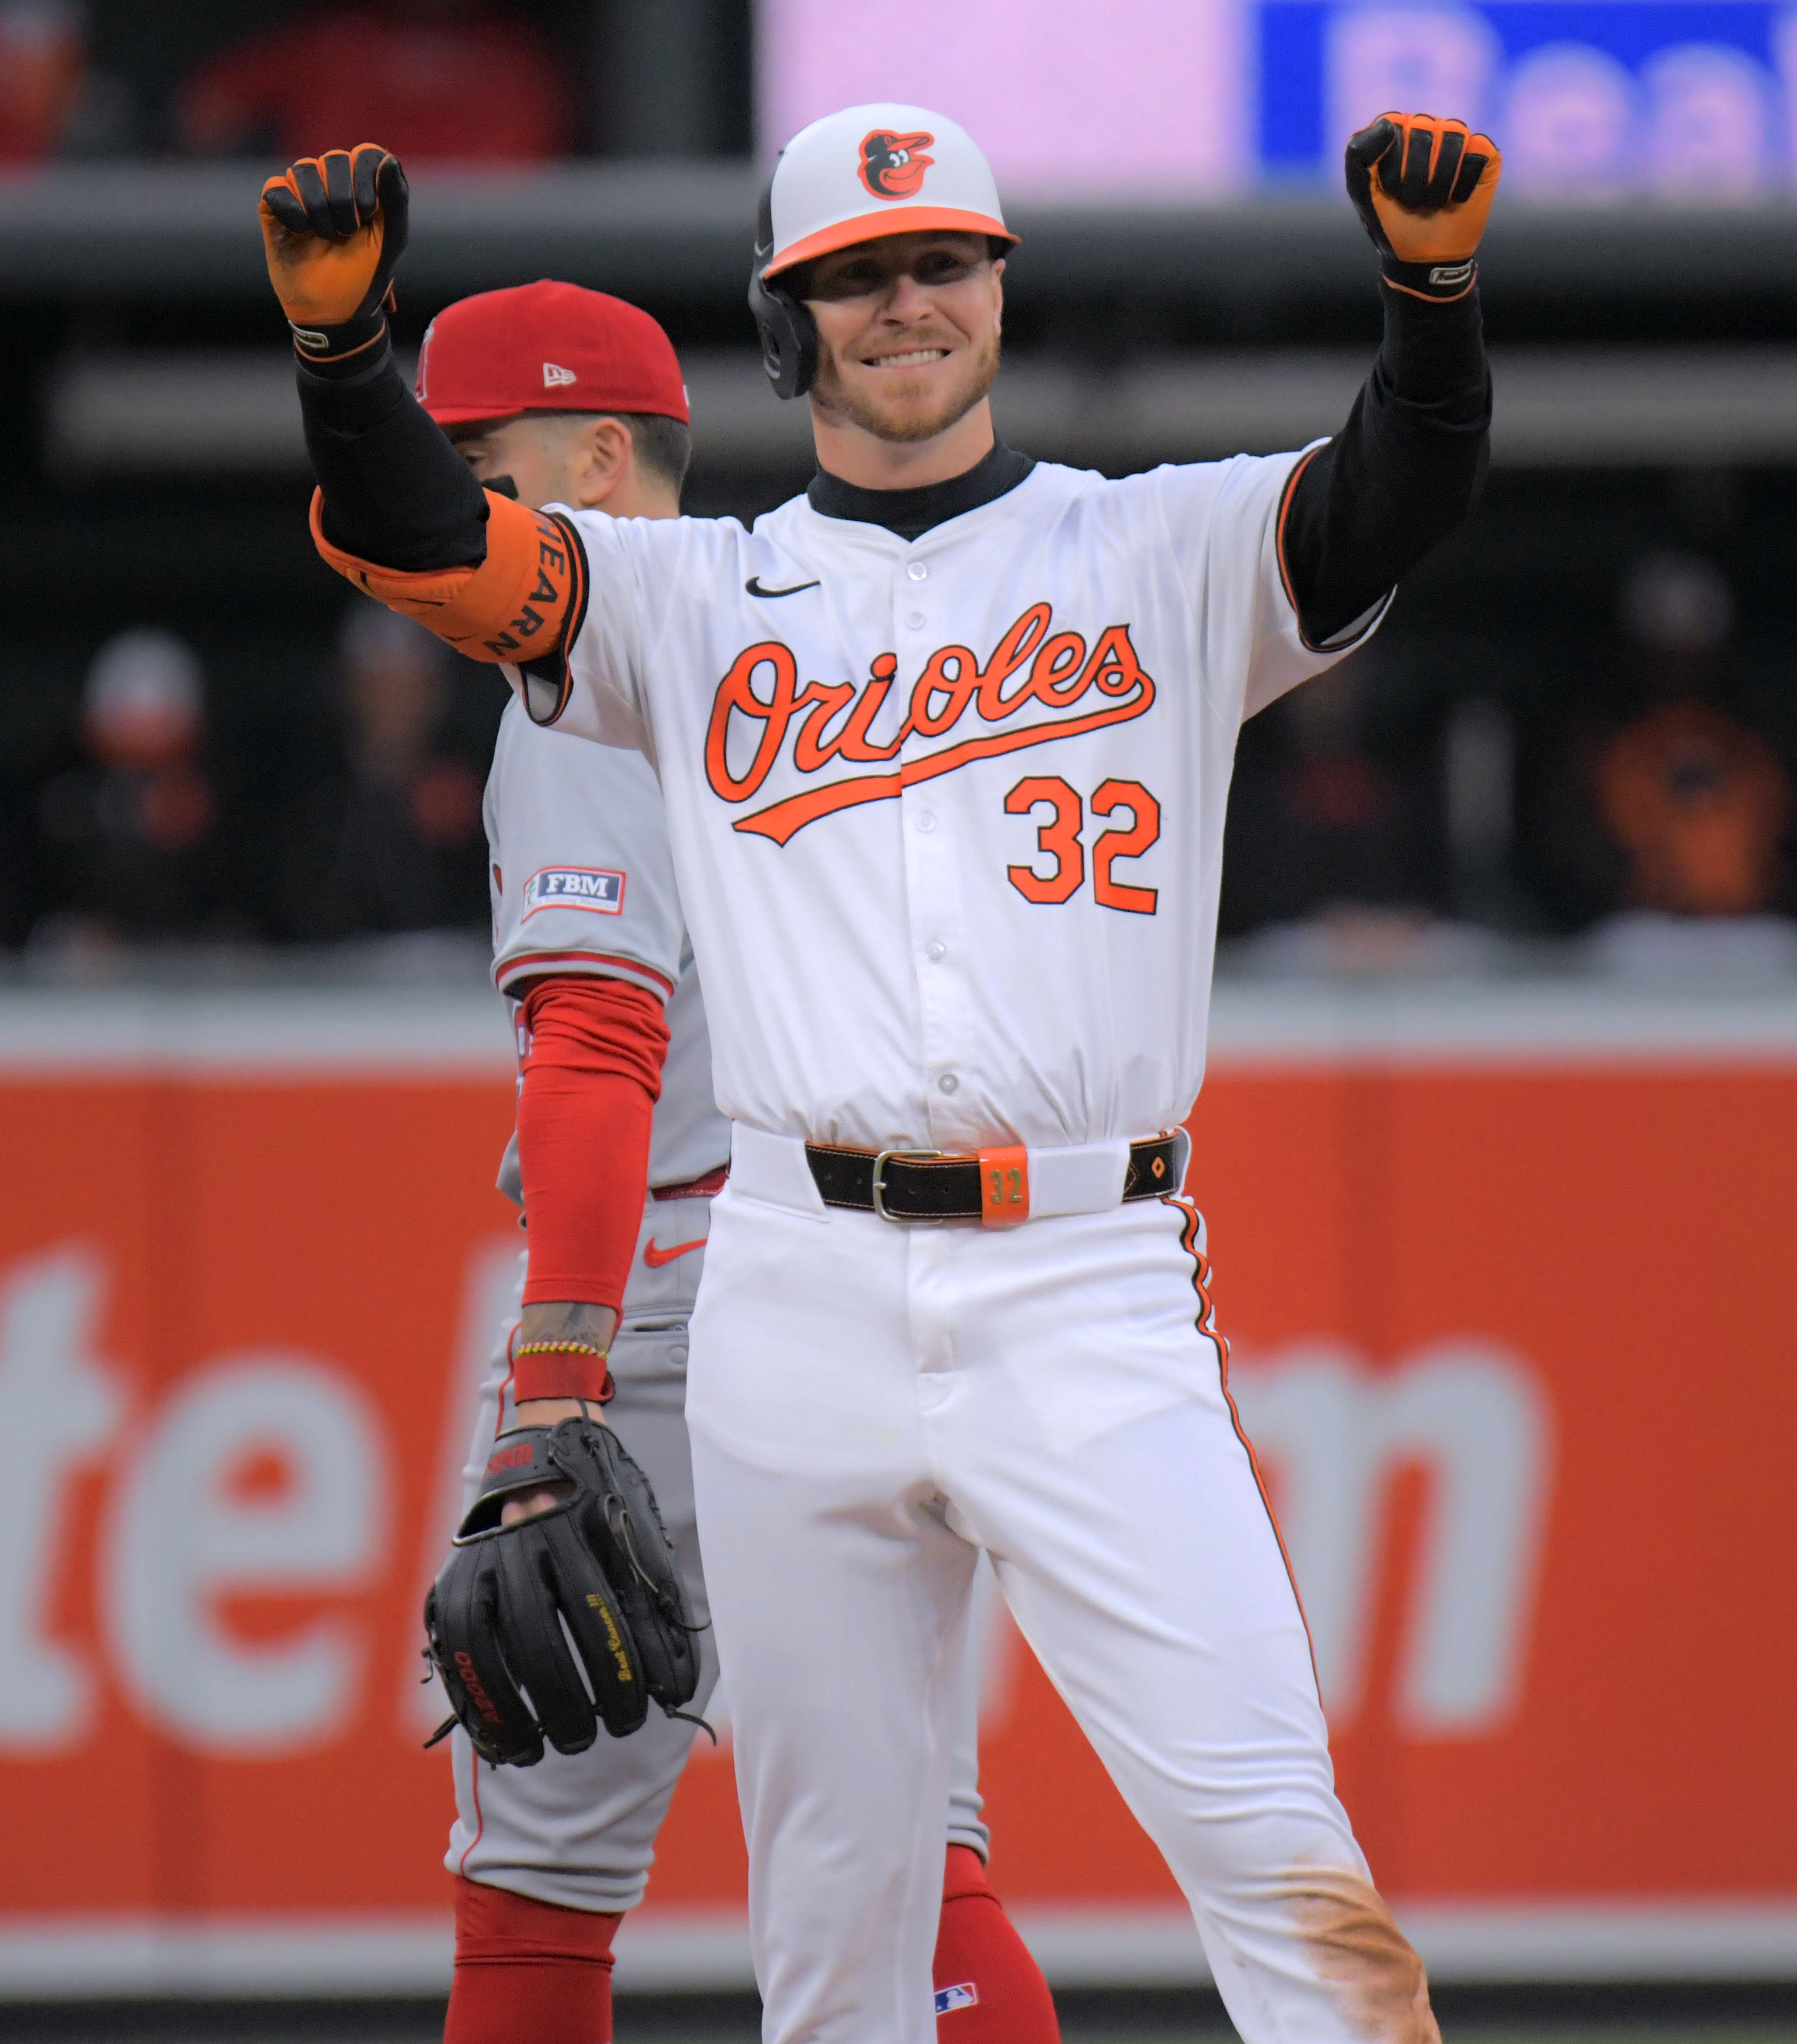 Mar 28, 2024: Baltimore Orioles' Ryan O'Hearn celebrates his pinch hit double against the Los Angeles Angels during opening day of Major League Baseball at Oriole Park at Camden Yards. (Karl Merton Ferron/Staff)